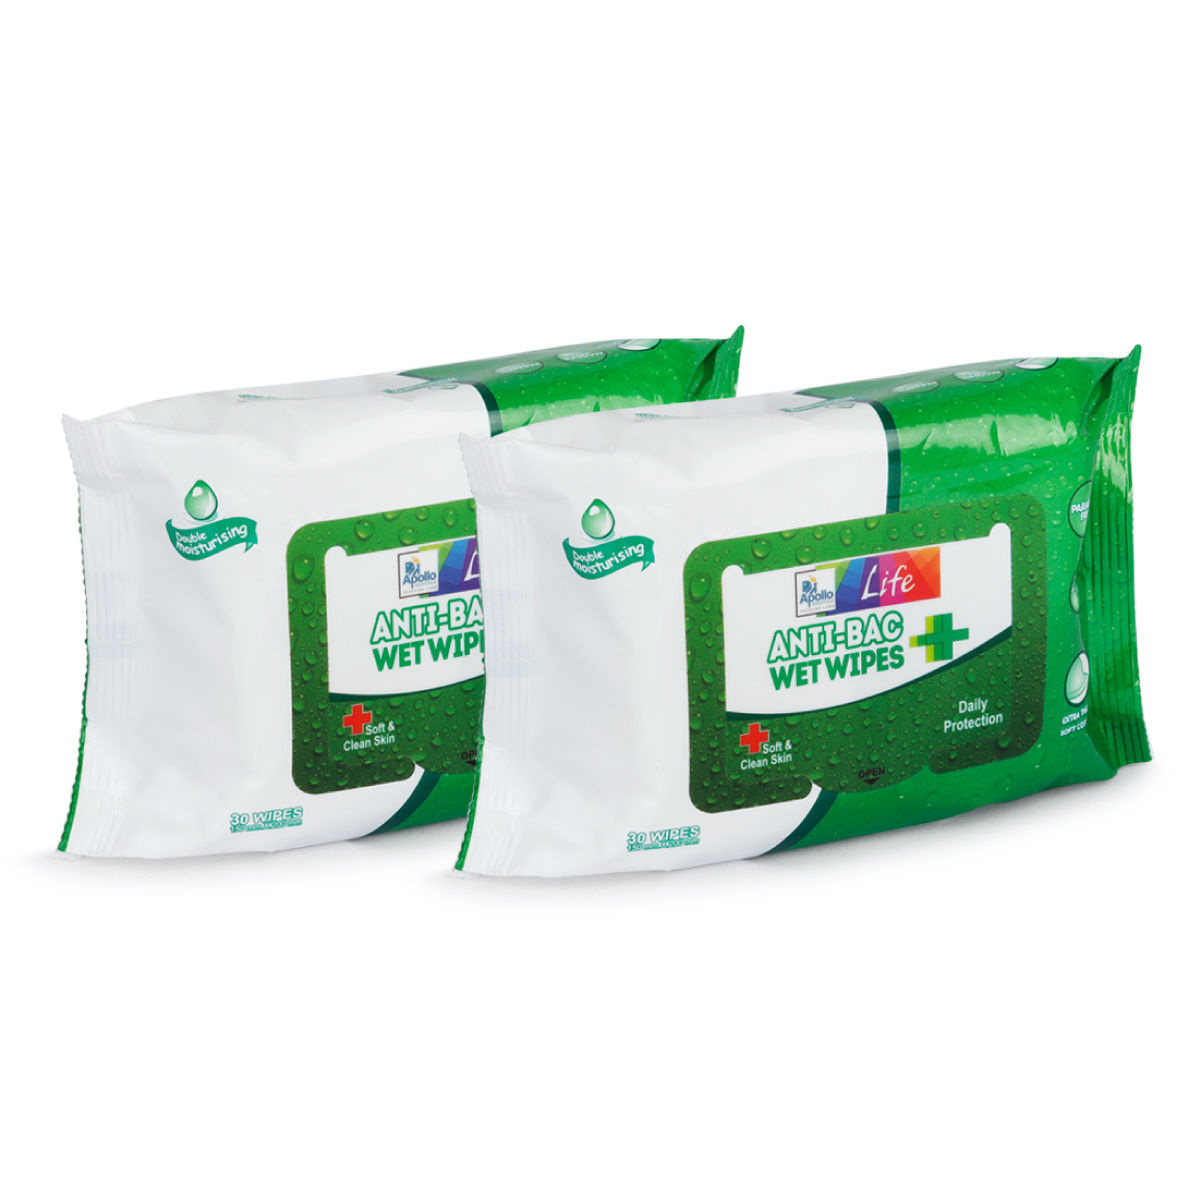 Apollo Life Anti-Bac Wet Wipes, 60 Count (2x30 Wipes), Pack of 2 S